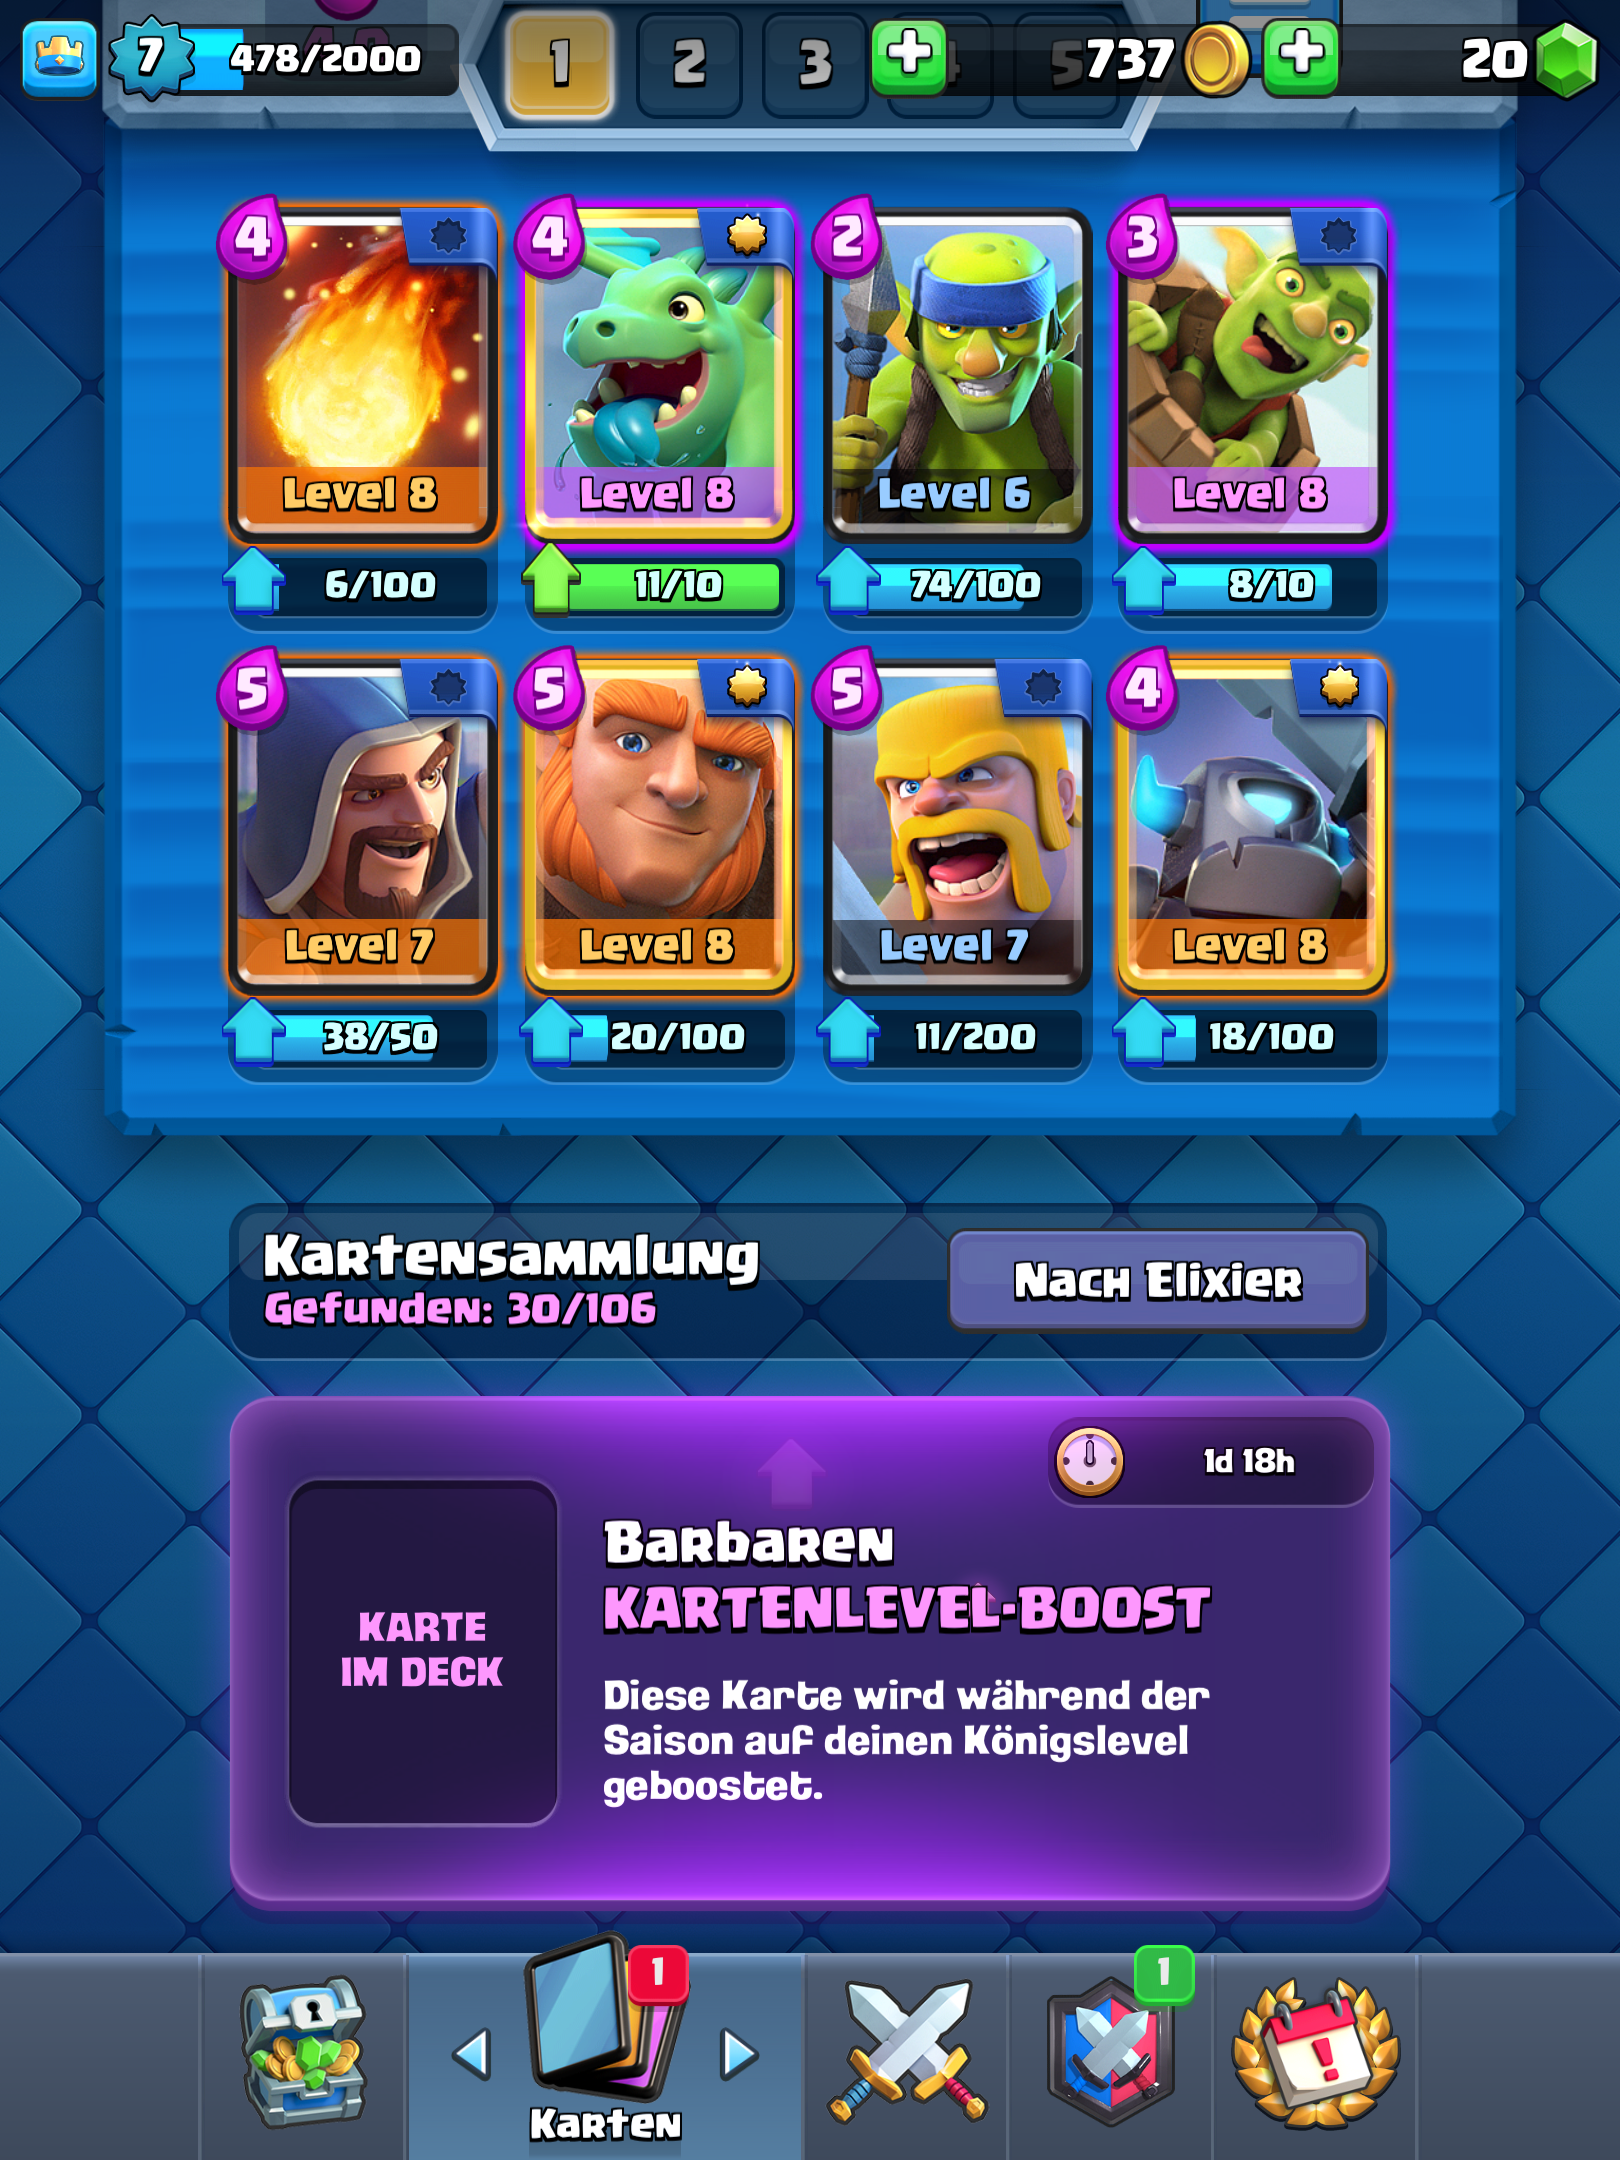 What are some good arena 4 decks in Clash Royale? - Quora